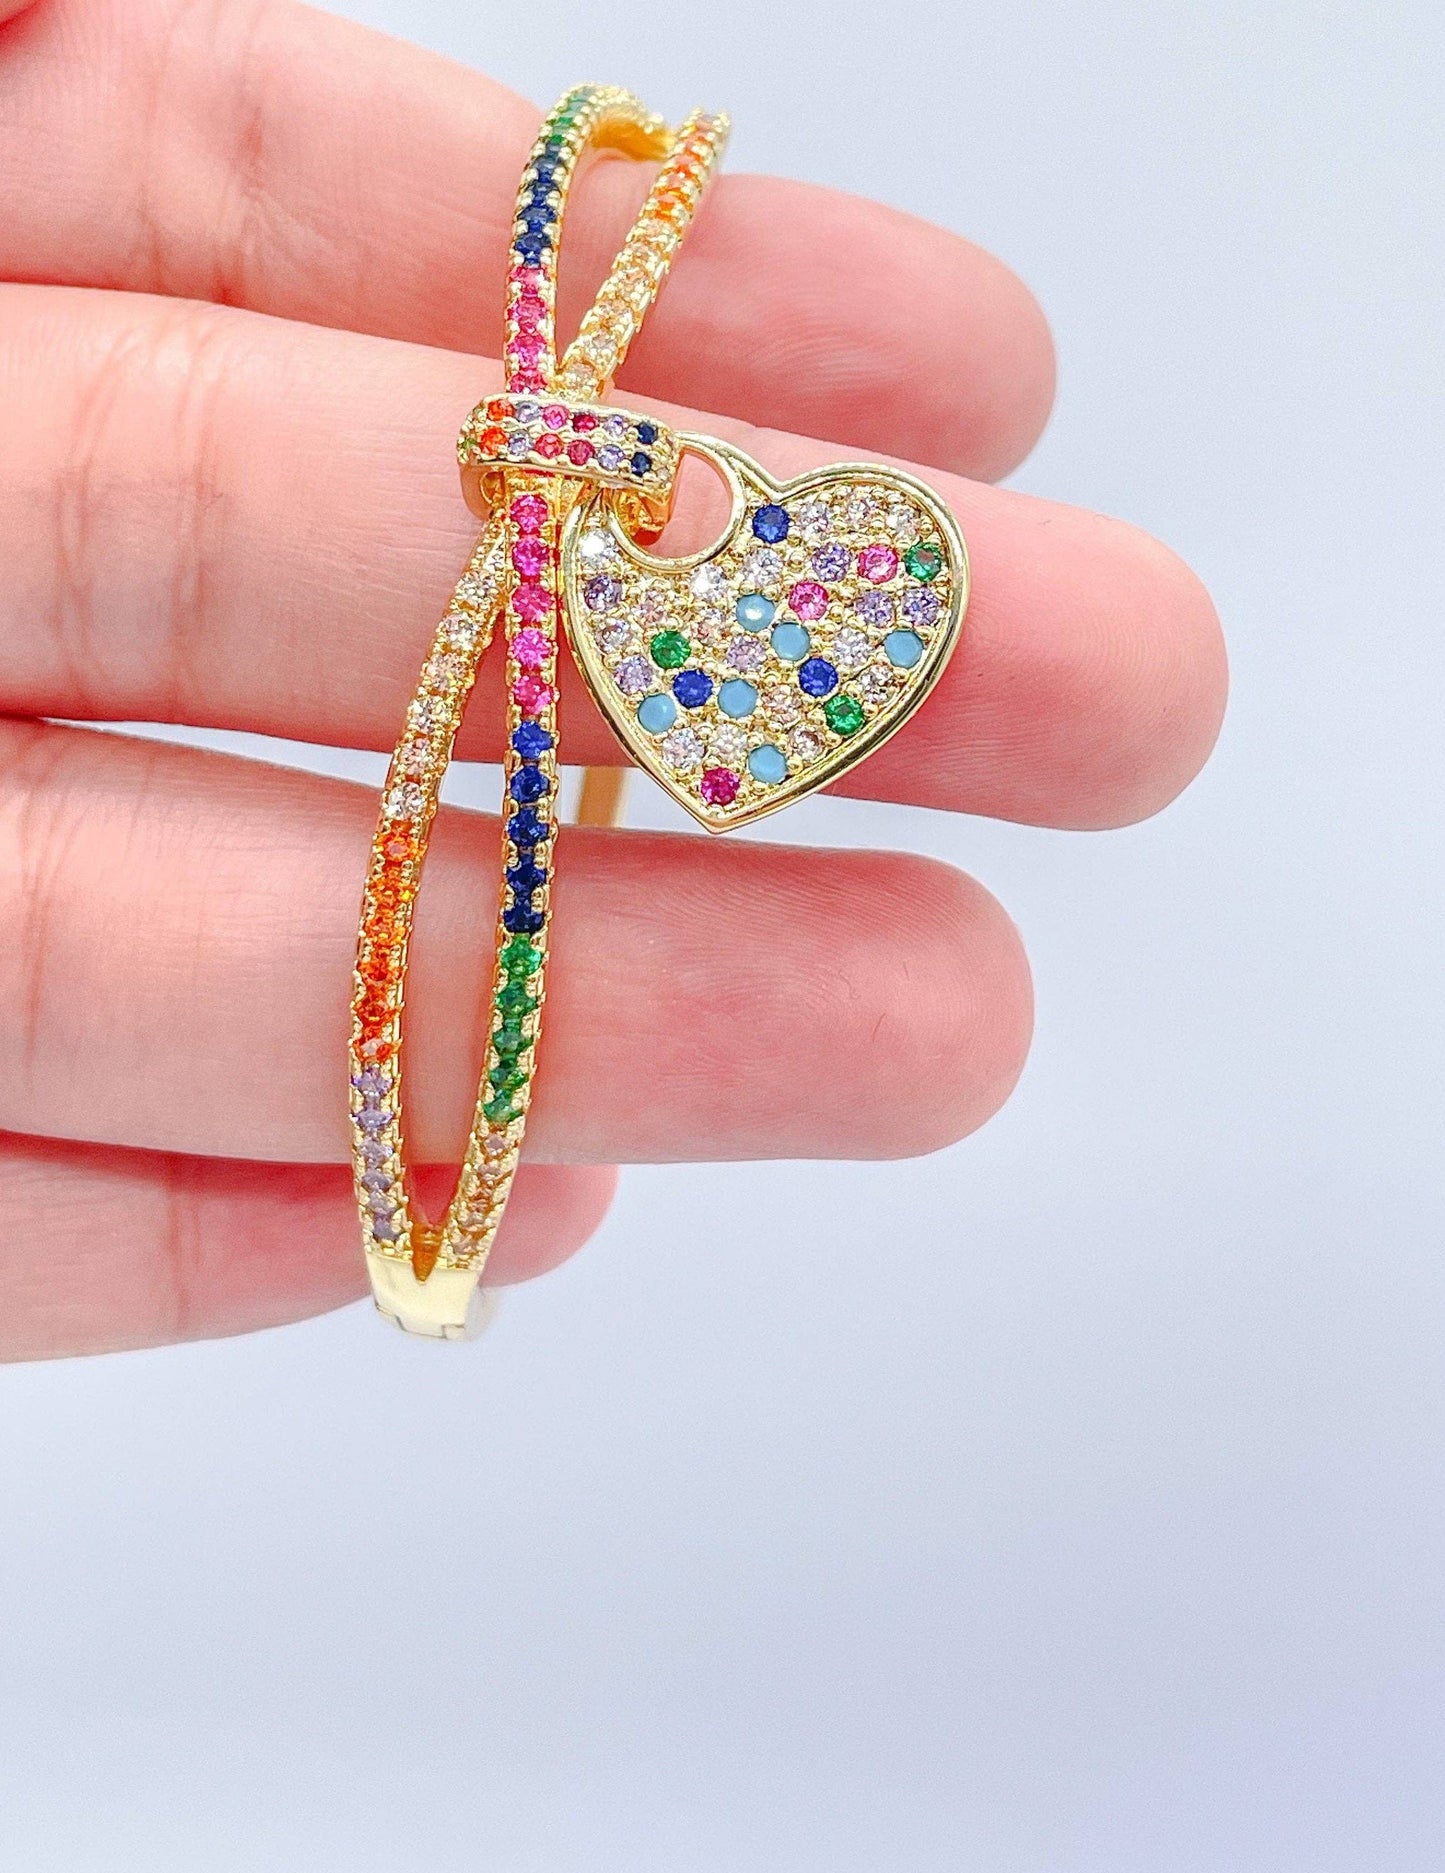 18k Gold Filled Colorful CZ Cuff Bracelet with Multi Color Dangling Heart